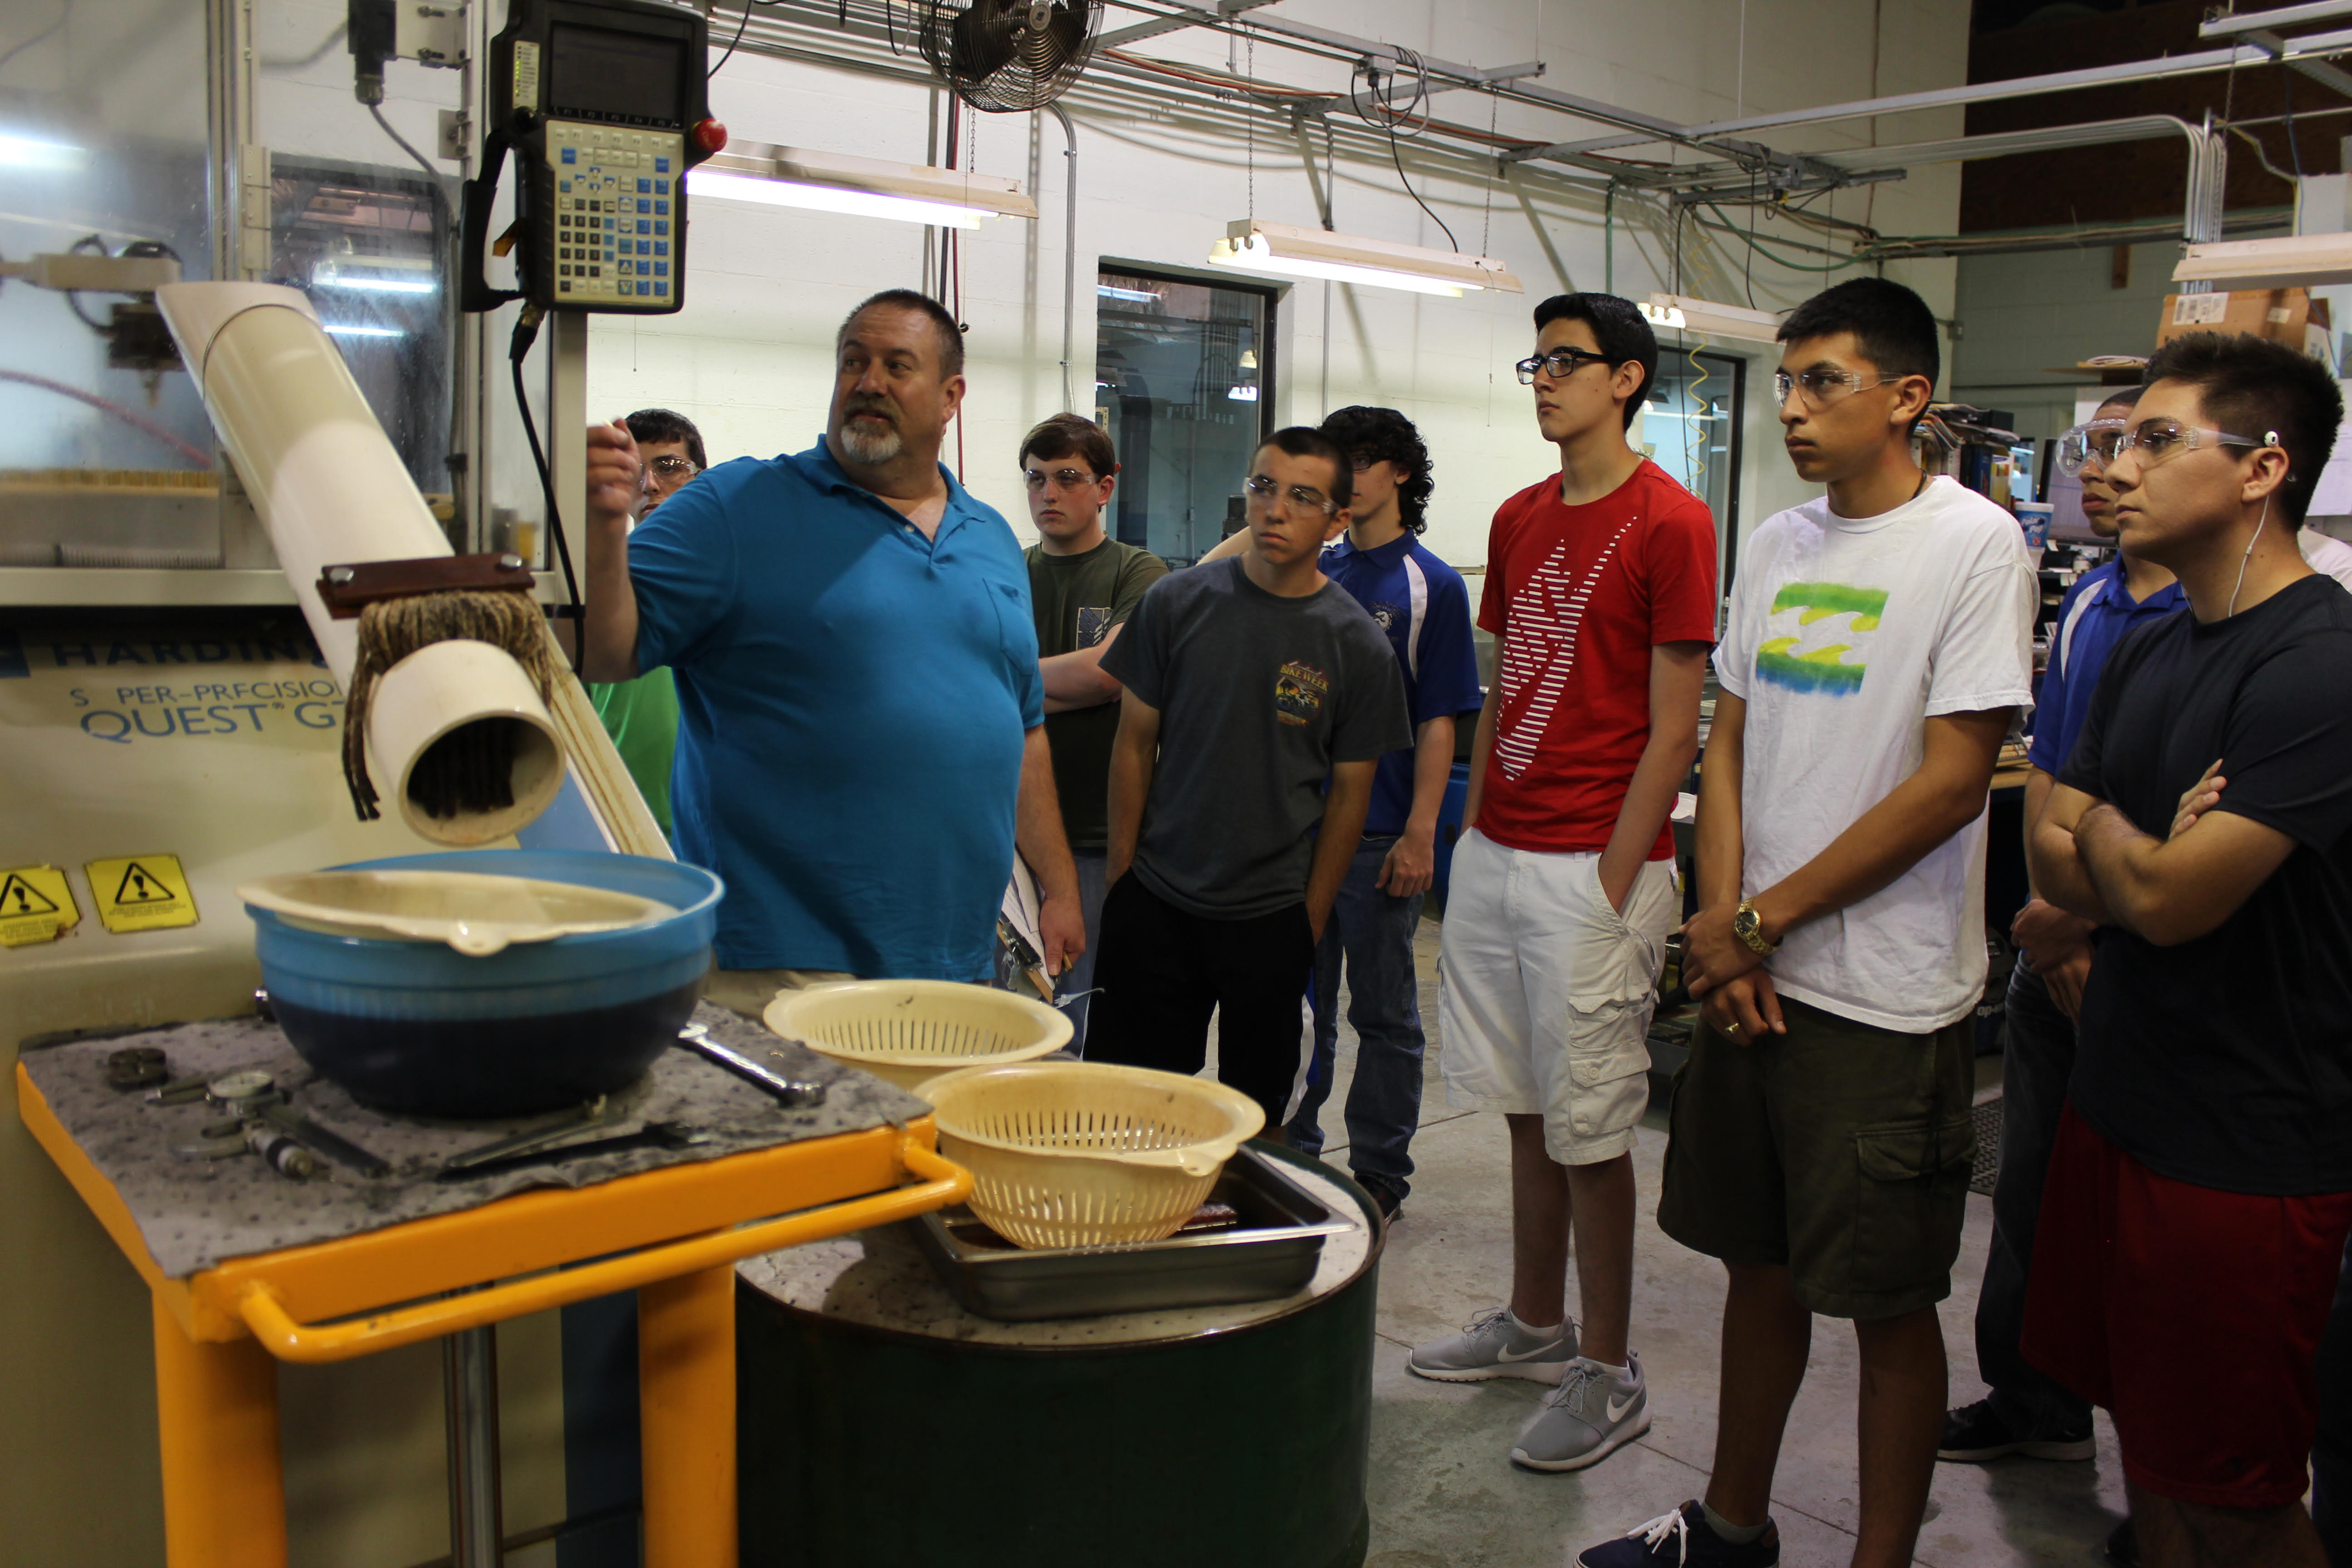 Ida S. Baker students gain industry experience at S4J Manufacturing Services